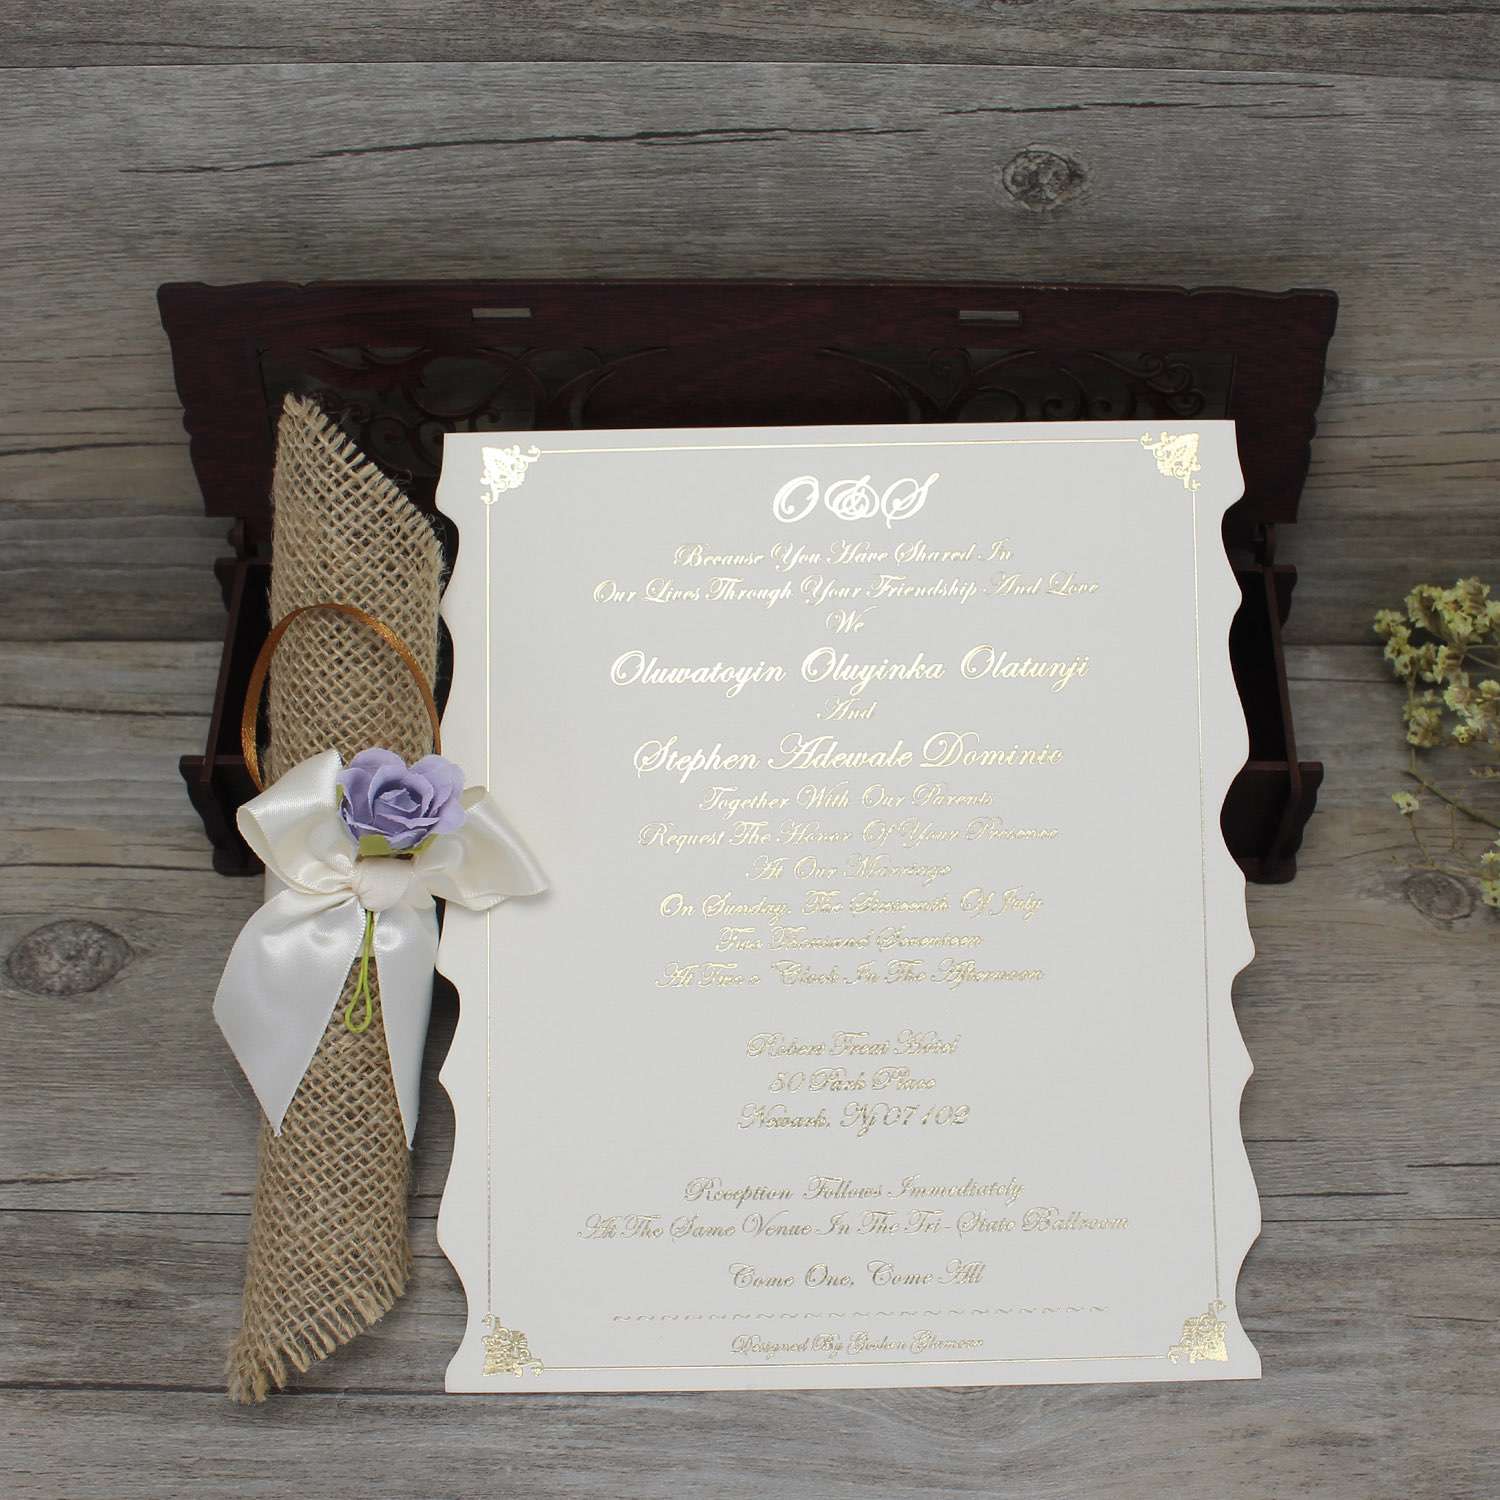 Black Wooden Box Invitation Card Customized Engraved Text